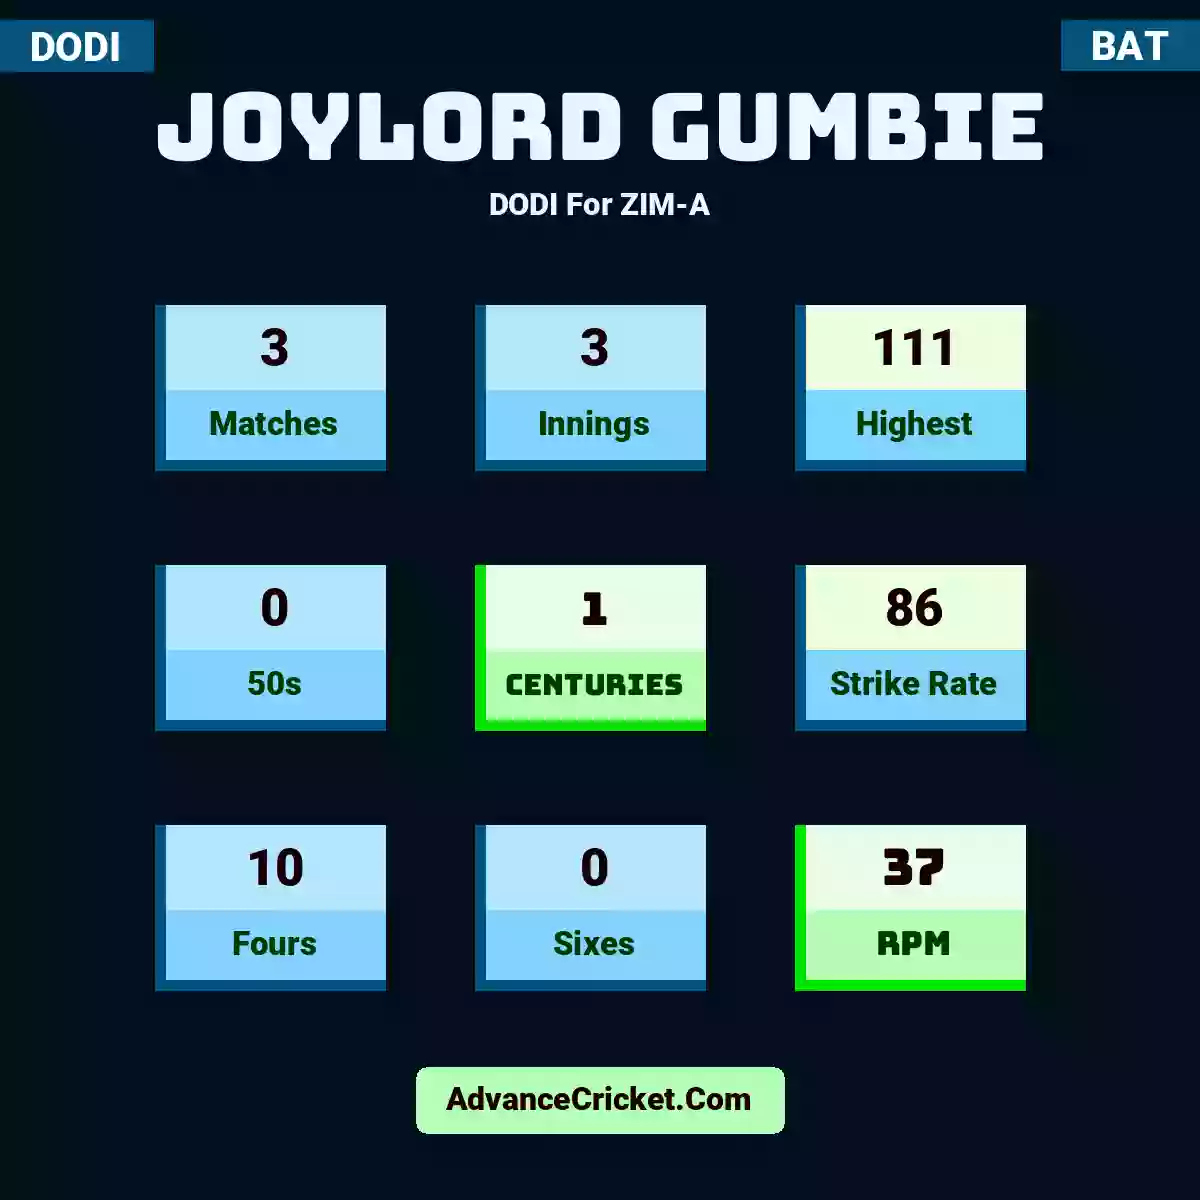 Joylord Gumbie DODI  For ZIM-A, Joylord Gumbie played 3 matches, scored 111 runs as highest, 0 half-centuries, and 1 centuries, with a strike rate of 86. J.Gumbie hit 10 fours and 0 sixes, with an RPM of 37.